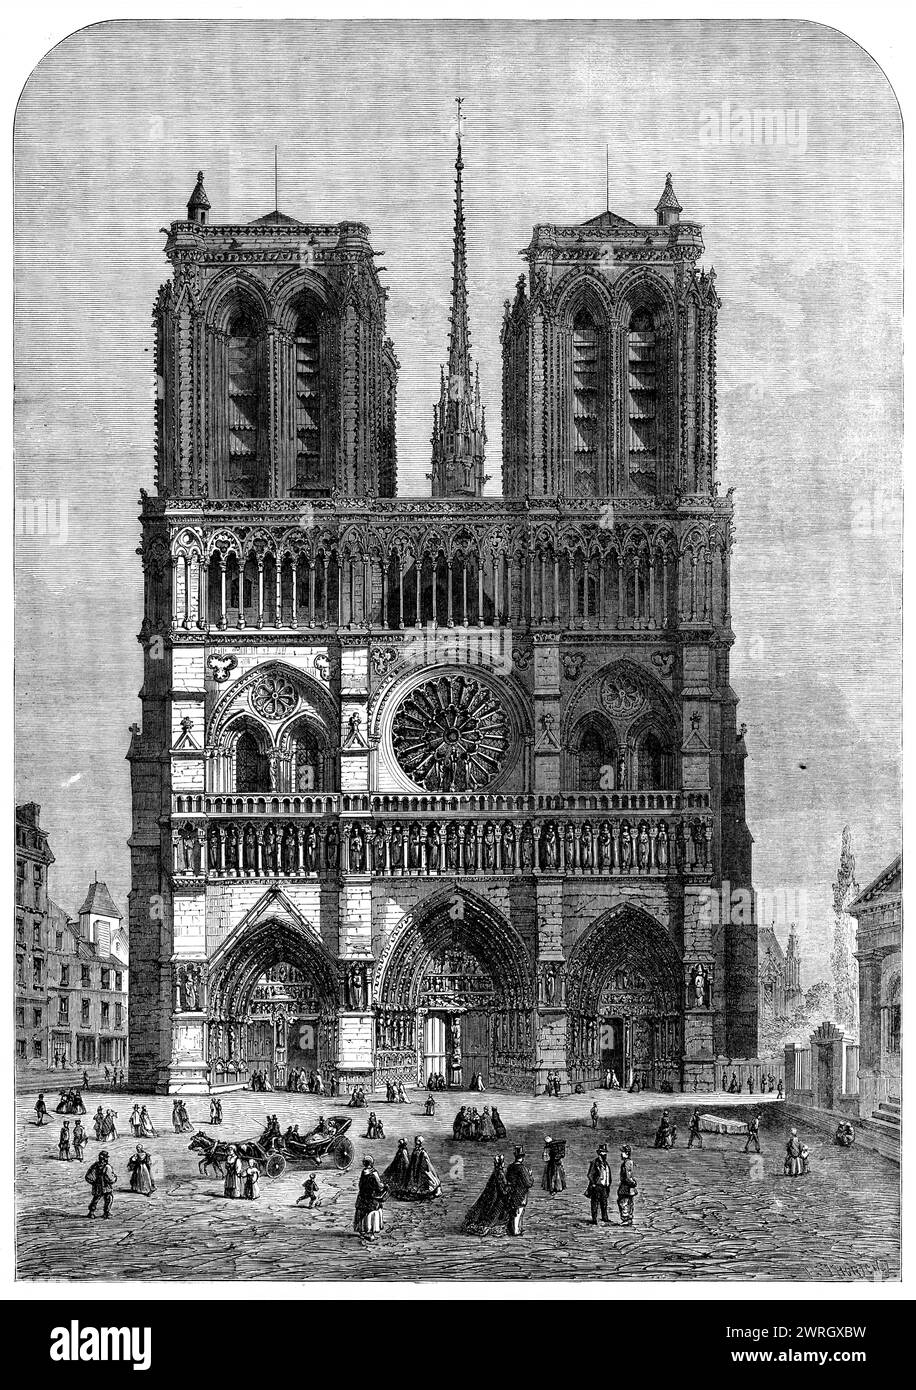 Restoration of Notre Dame, Paris: the Western Fa&#xe7;ade, 1862. '...the exterior and interior restoration...will have occupied exactly a quarter of a century when finished...[The work is] being proceeded with in all due haste; several years, however, will yet be required for its restoration to the rank it deserves to occupy as one of the most perfect specimens of Gothic art in France...M. Viollet-le-Duc, the eminent architect charged with this colossal undertaking...informs us that the restoration was commenced...in 1845...and will be completely terminated in 1869...This splendid facade, the Stock Photo